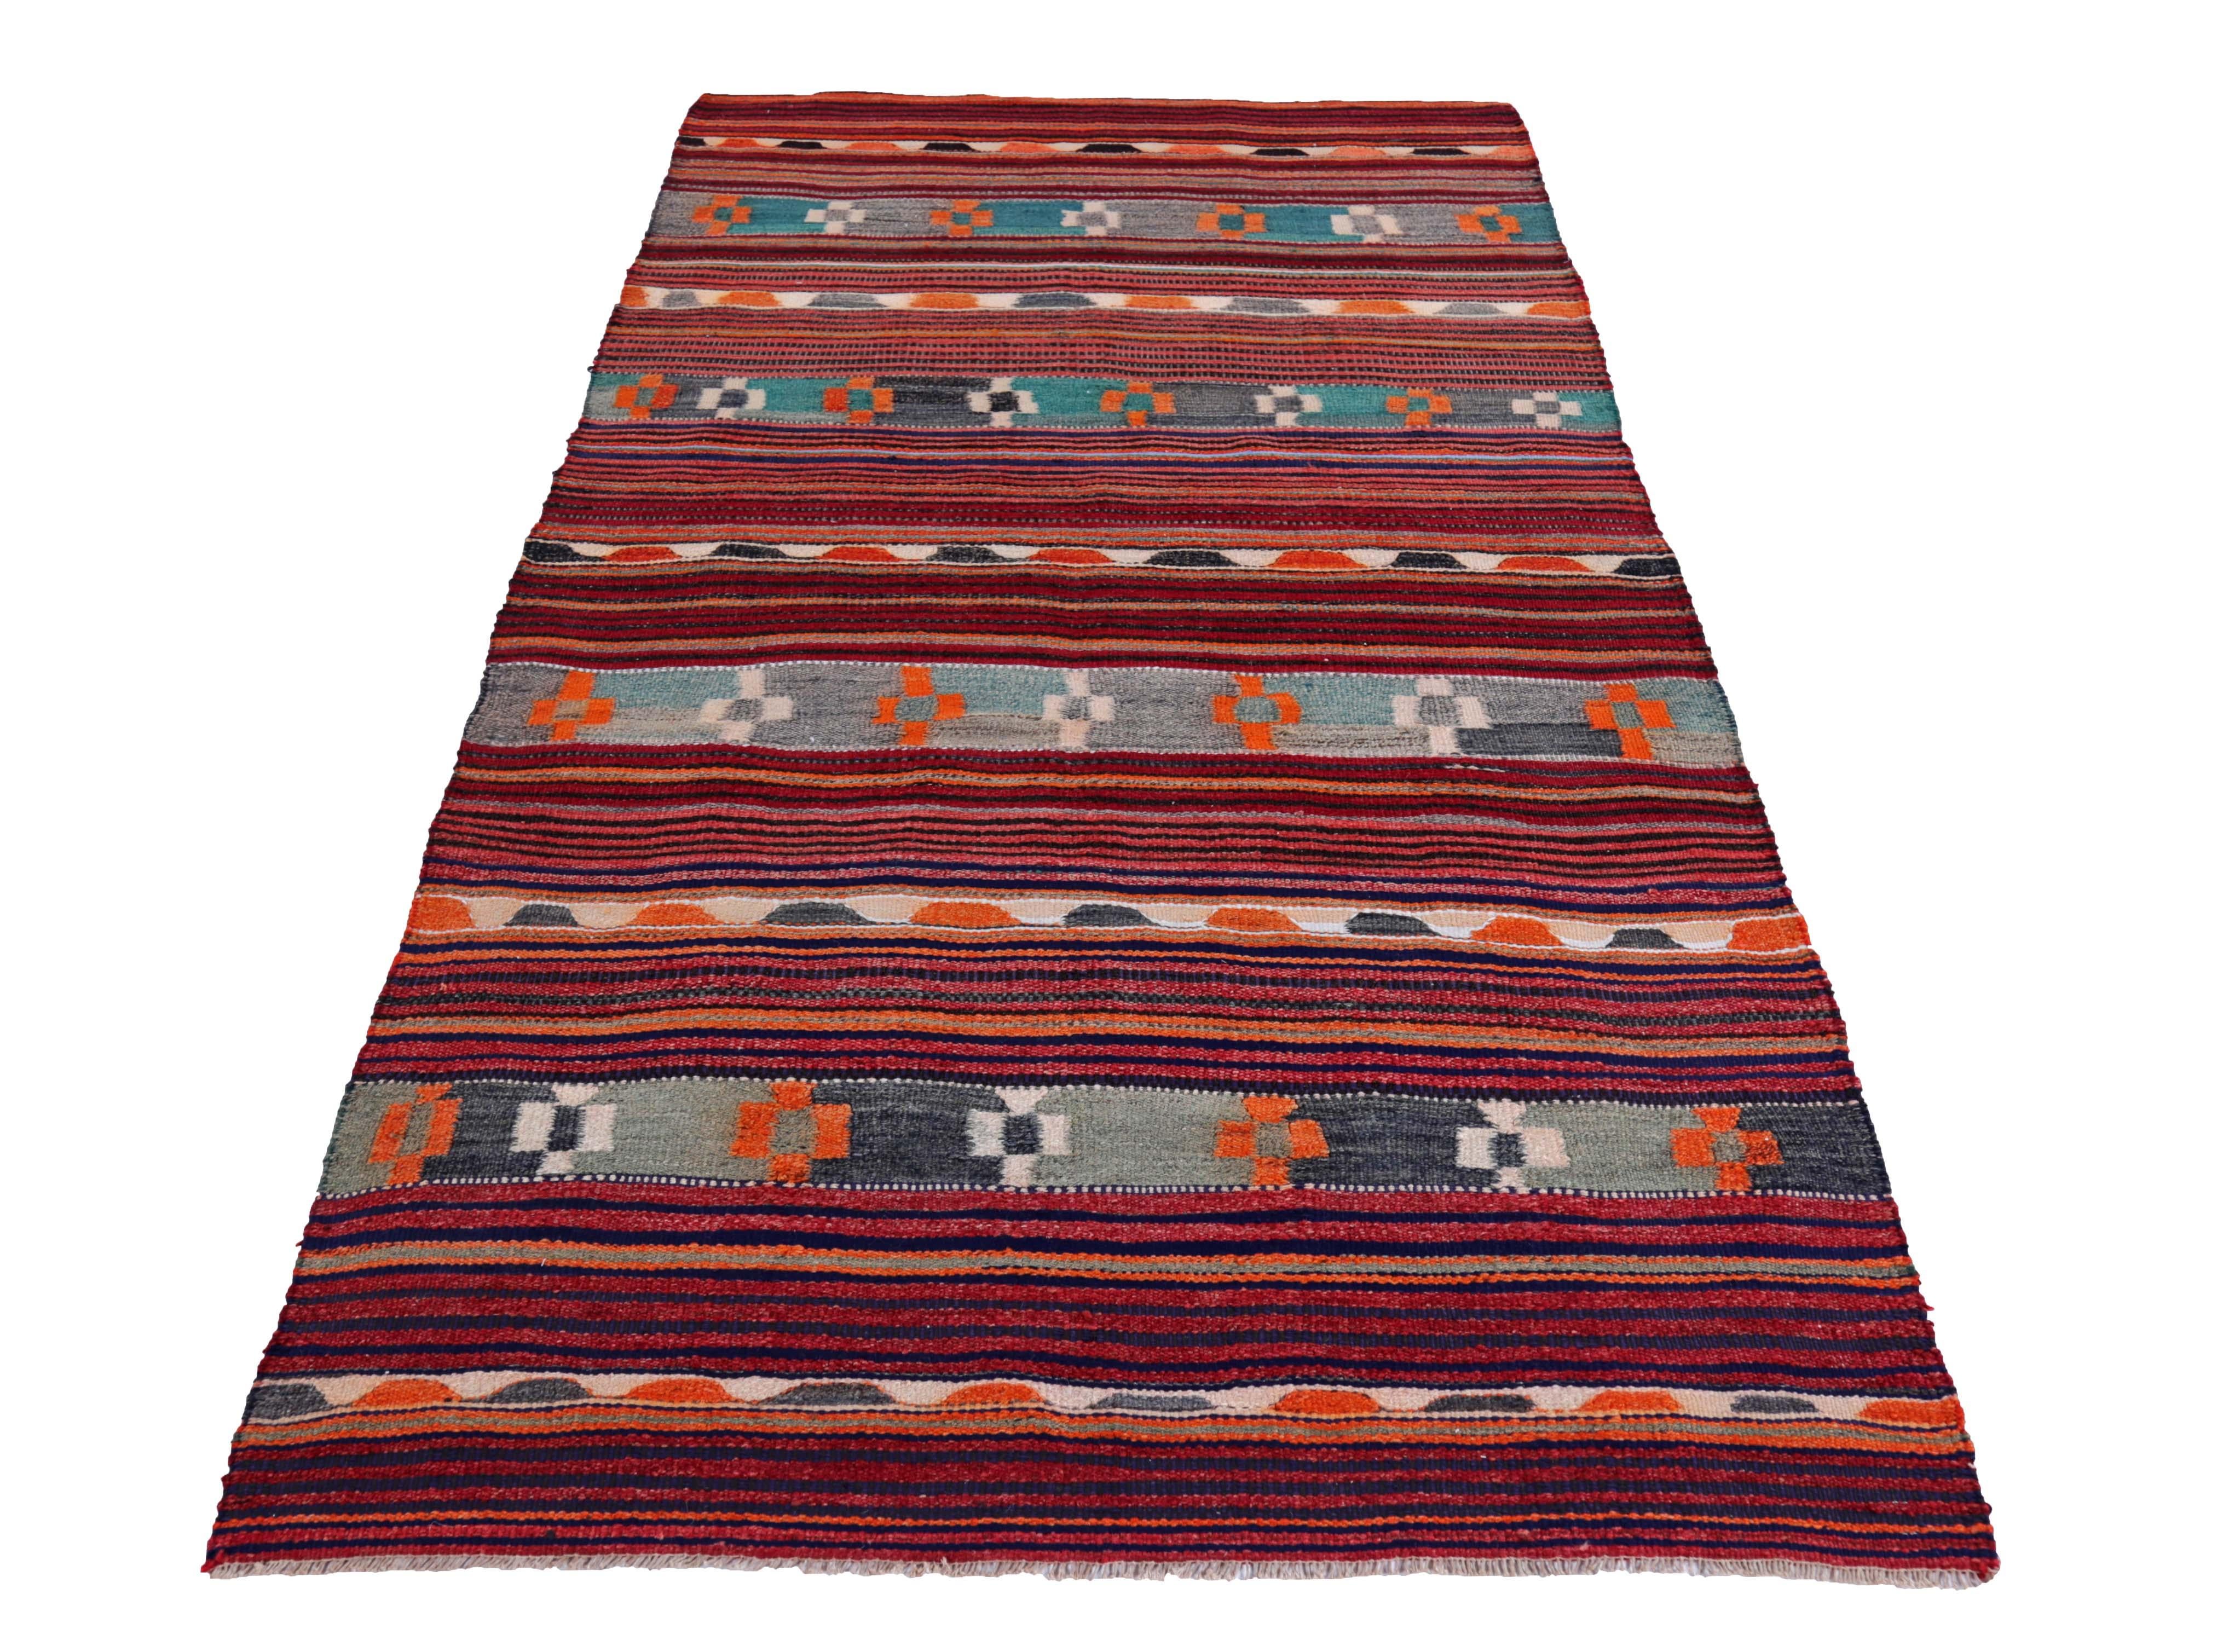 Turkish kilim rug handwoven from the finest sheep’s wool and colored with all-natural vegetable dyes that are safe for humans and pets. It’s a traditional Kilim flat-weave design featuring blue, green and orange tribal design patterns. It’s a